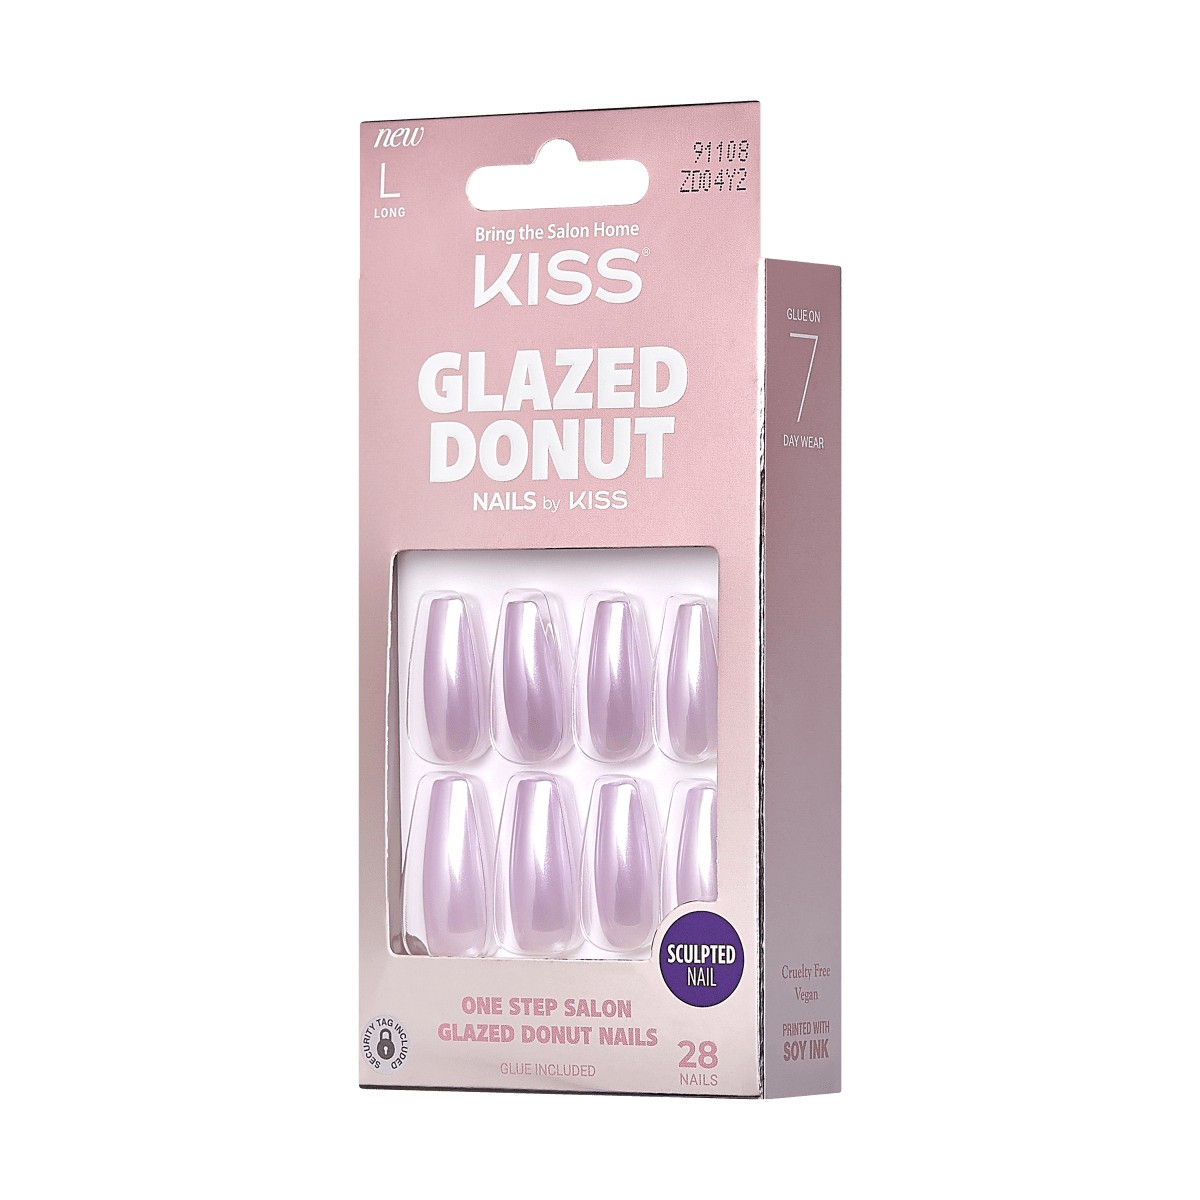 KISS Bare but Better Sculpted Nude Fake Nails, Nude Nude, 28 Count - Walmart .com